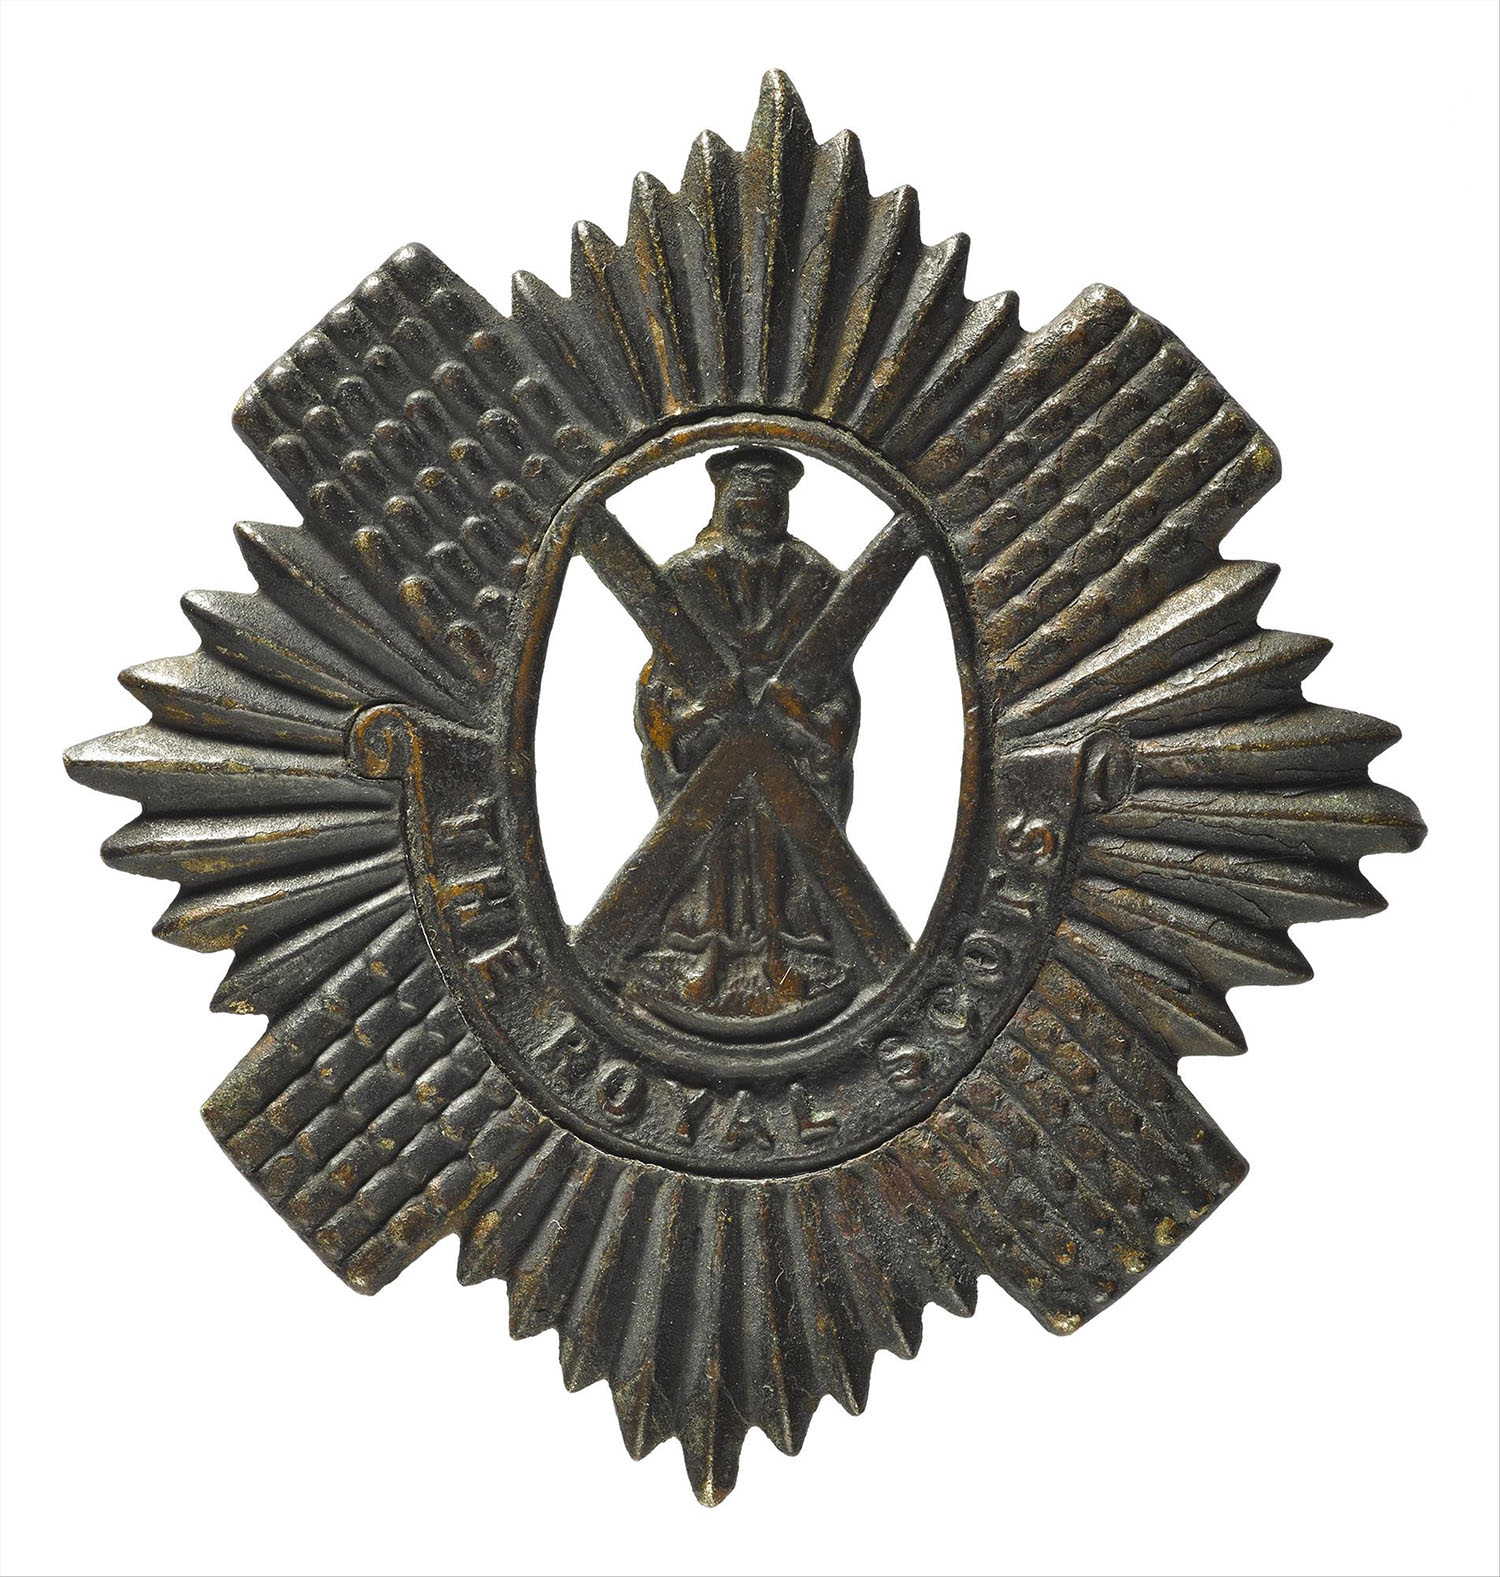 Glengarry badge of the Royal Scots, picked up at the scene of the Gretna Rail Disaster by John Baillie, brother of Private Andrew F. Baillie, Royal Scots, May 1915, World War I.